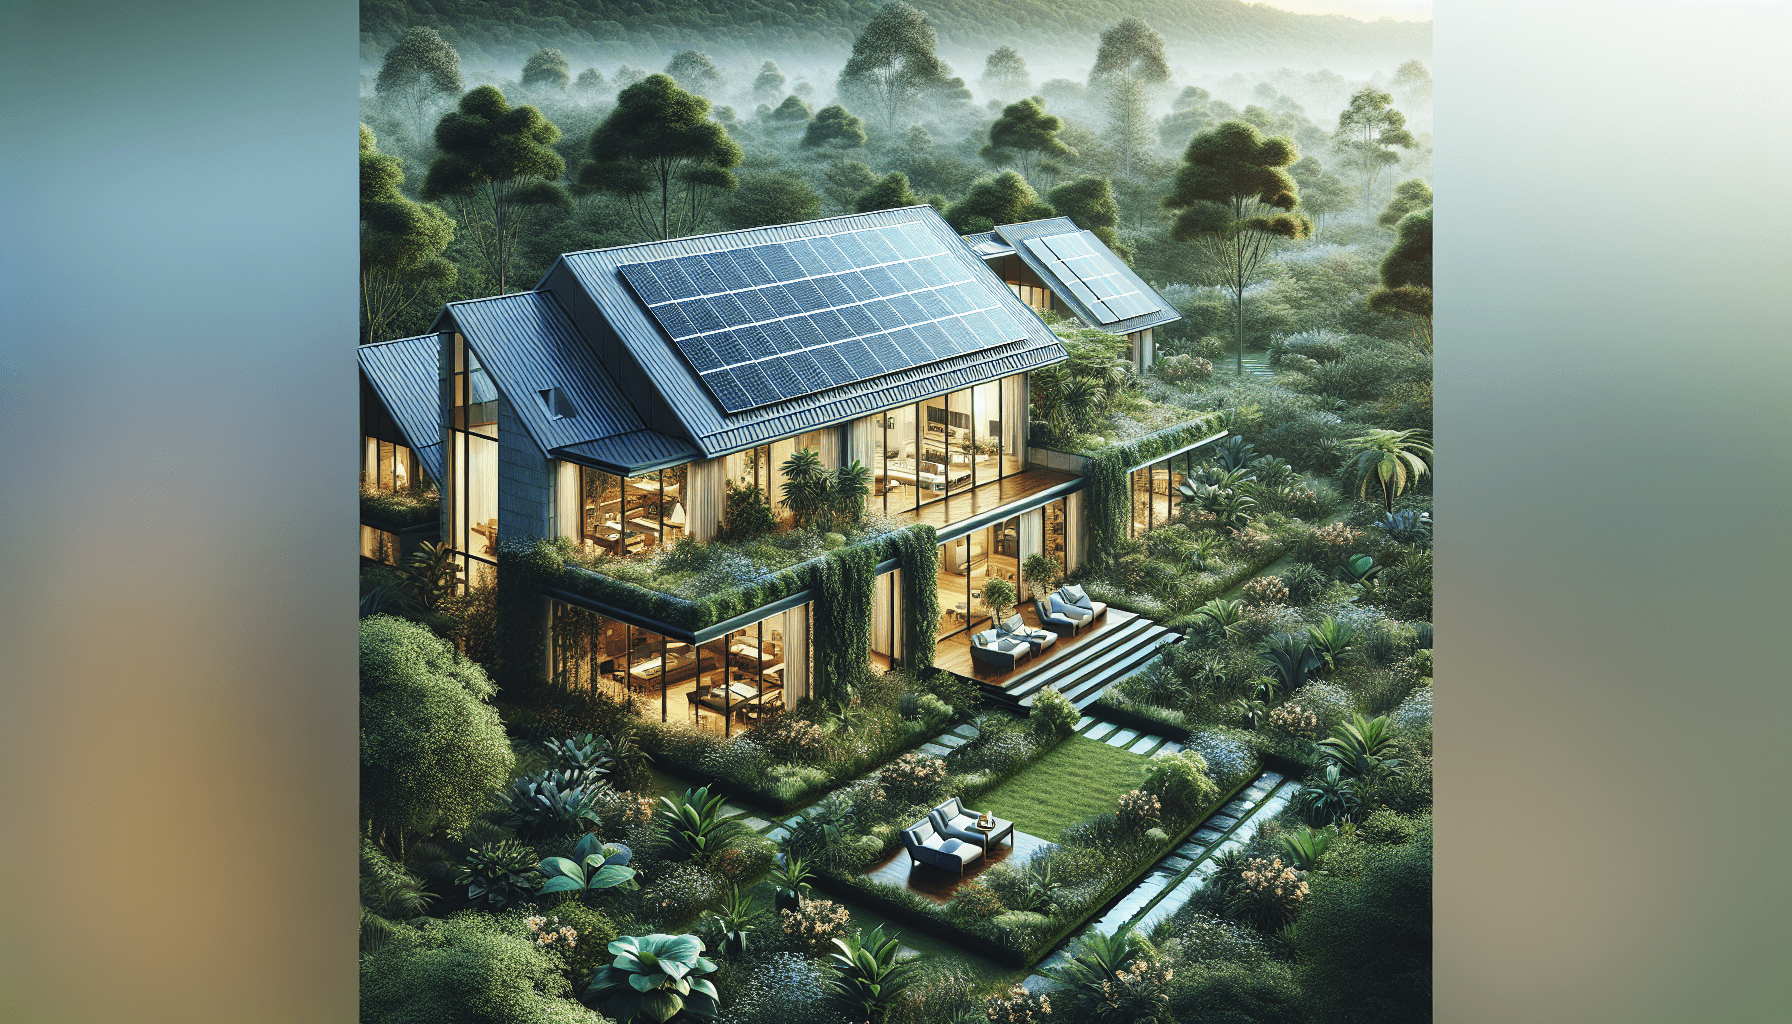 What Are The Benefits Of An Eco-friendly Home?